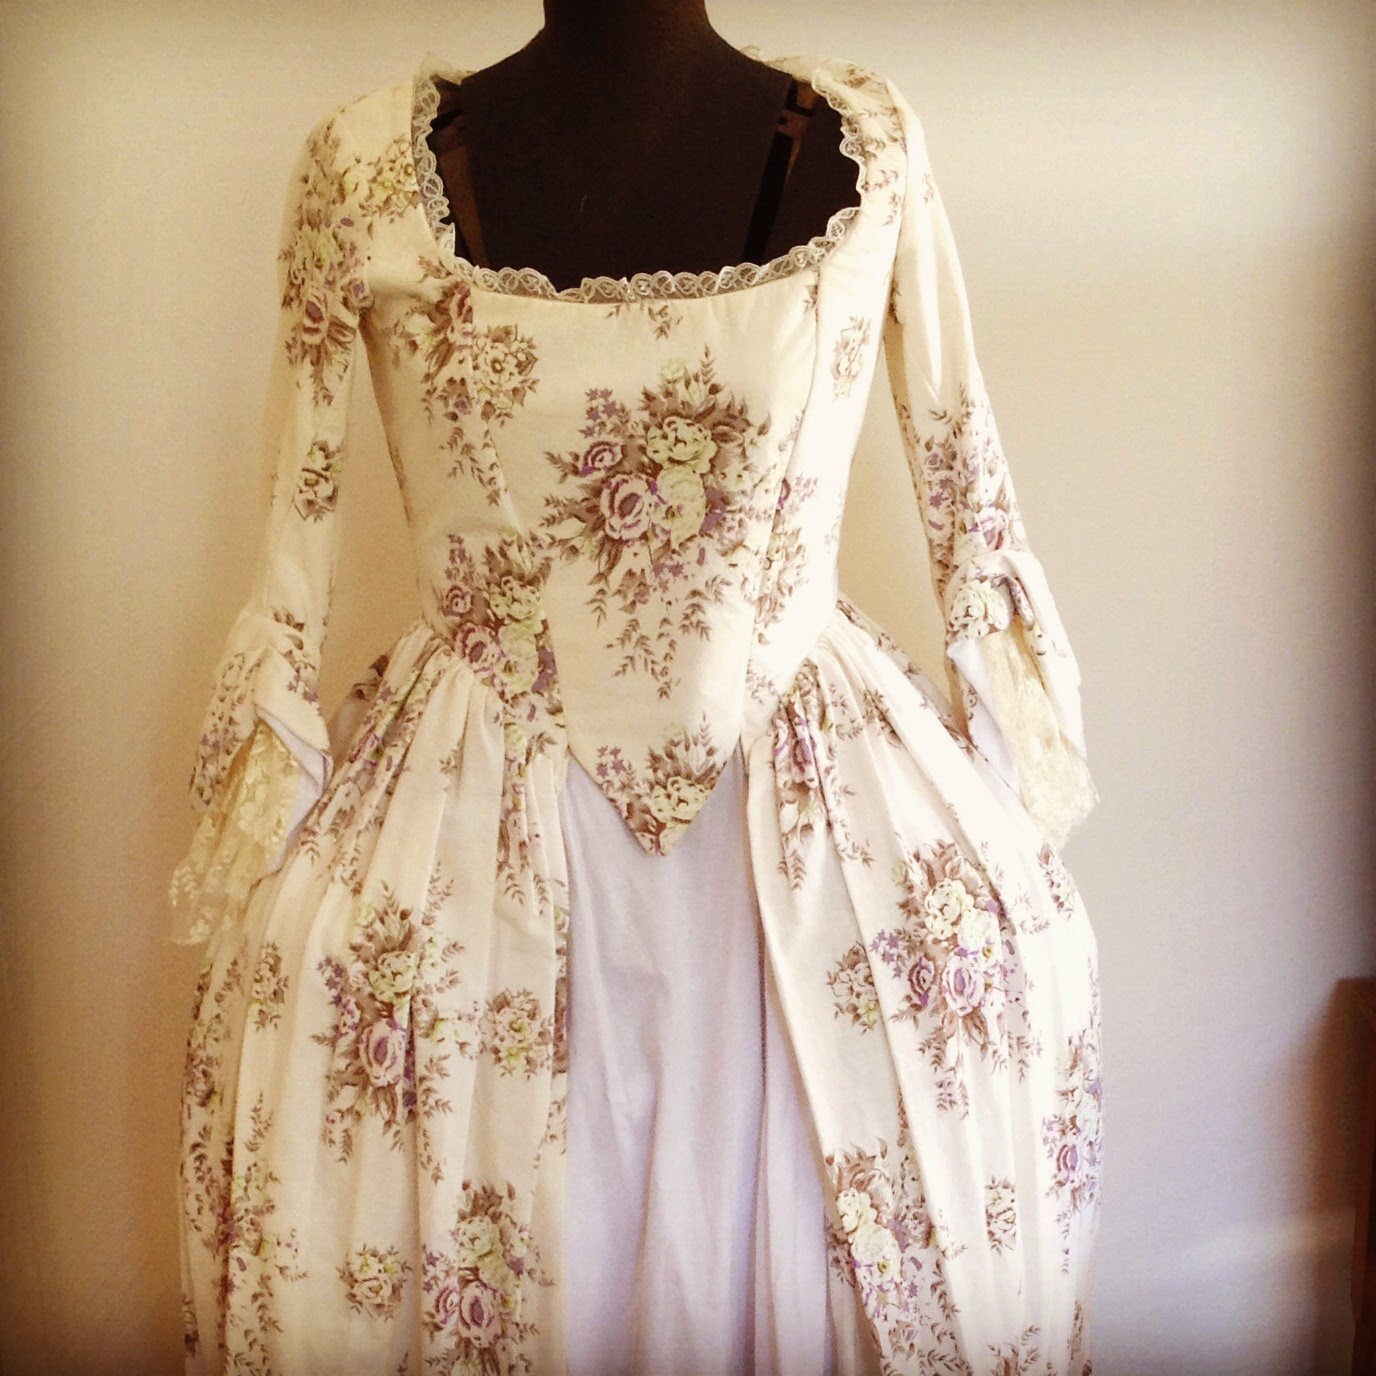 Fashioning Nostalgia: White and Floral 18th Century 'Marie Antoinette' Gown